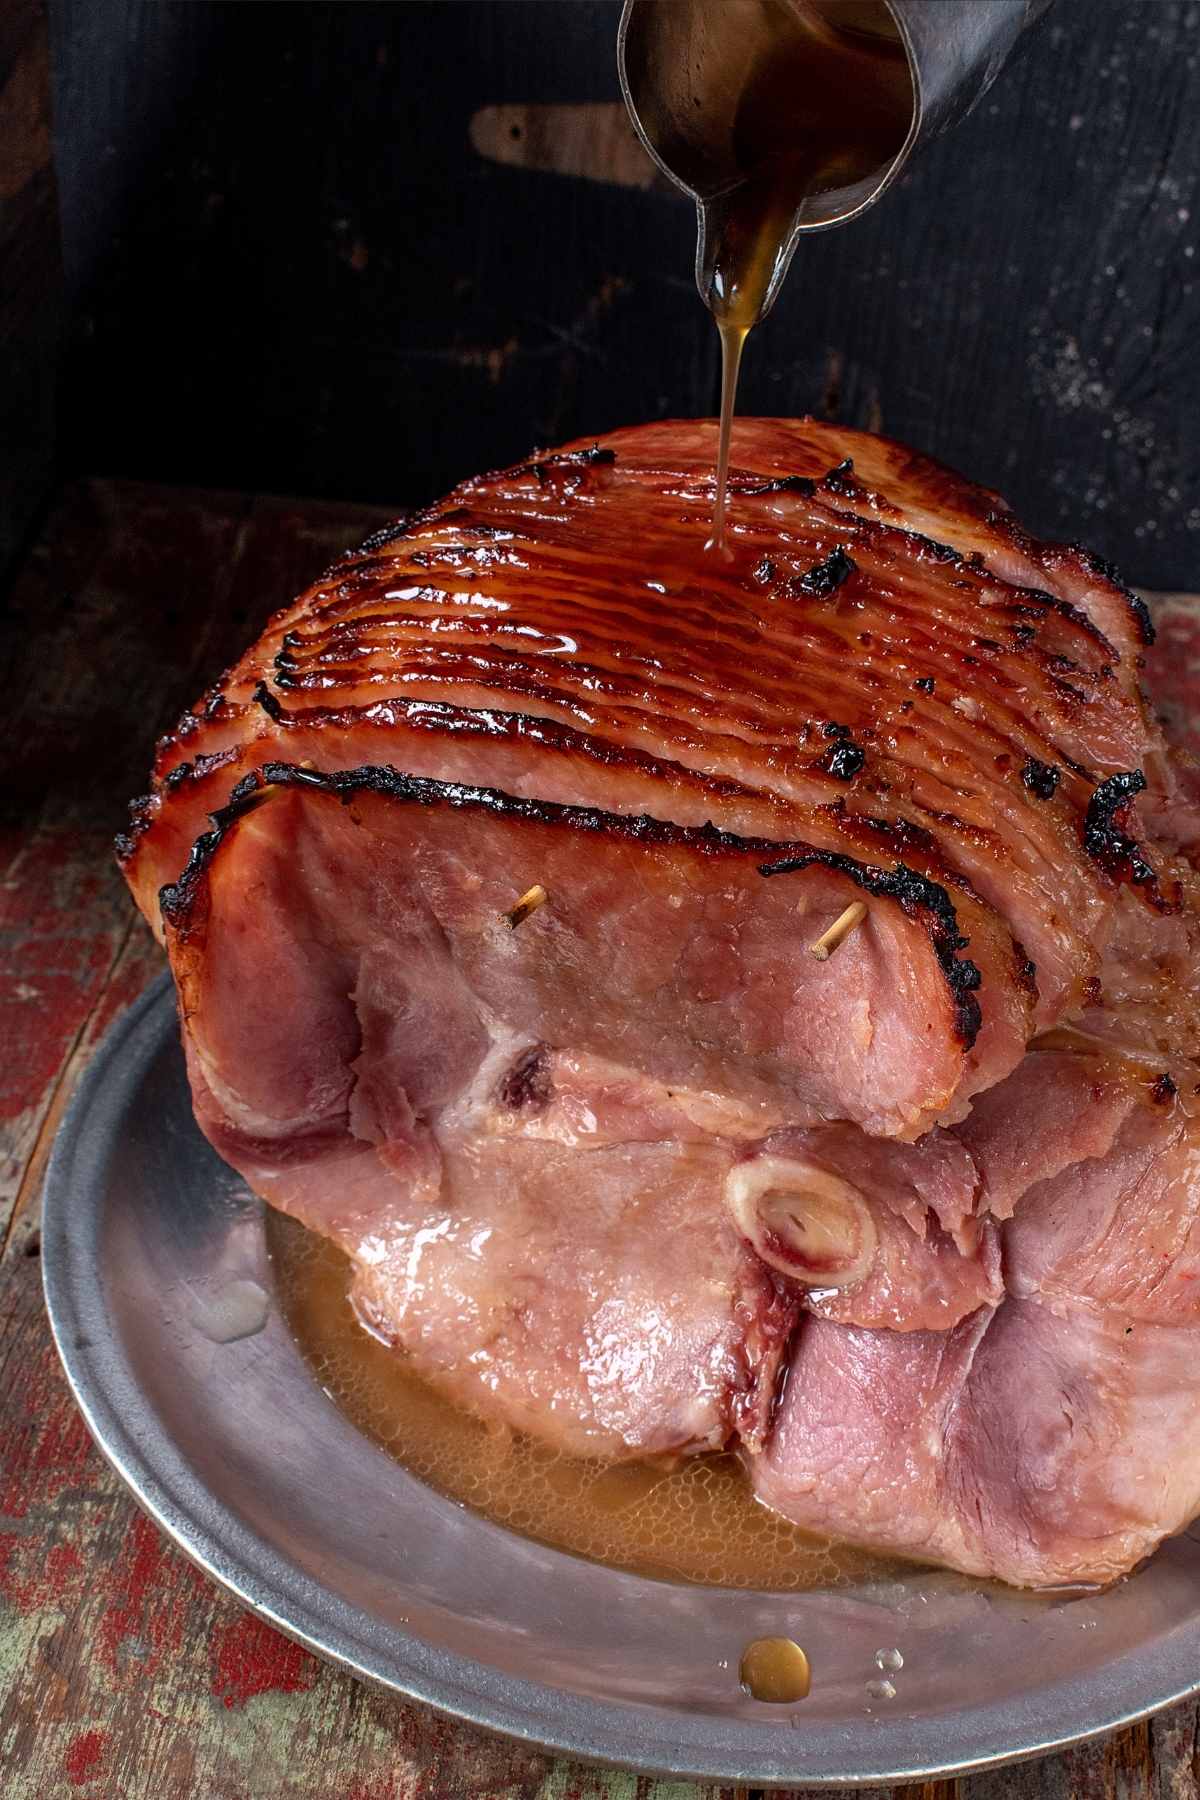 If you’ve never cooked bone-in ham on your own, there’s no need to worry! Cooking a ham is a lot easier than it seems, from cooking times to temperatures, we’re here to help you with any questions you may have about bone-in ham.